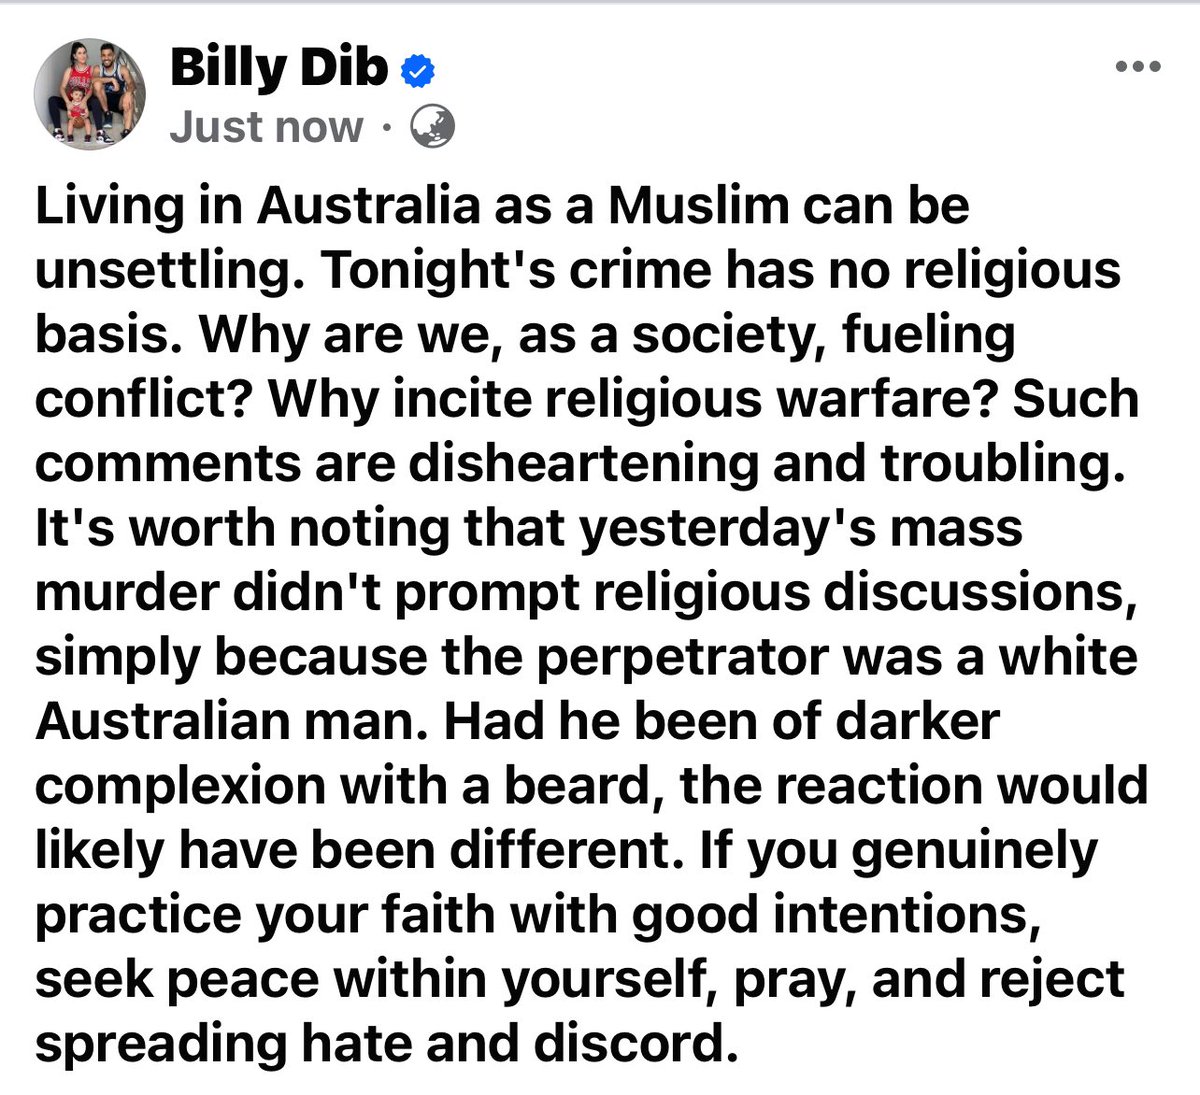 “Sharing my perspective on yet another tragic attack at a Sydney church.'